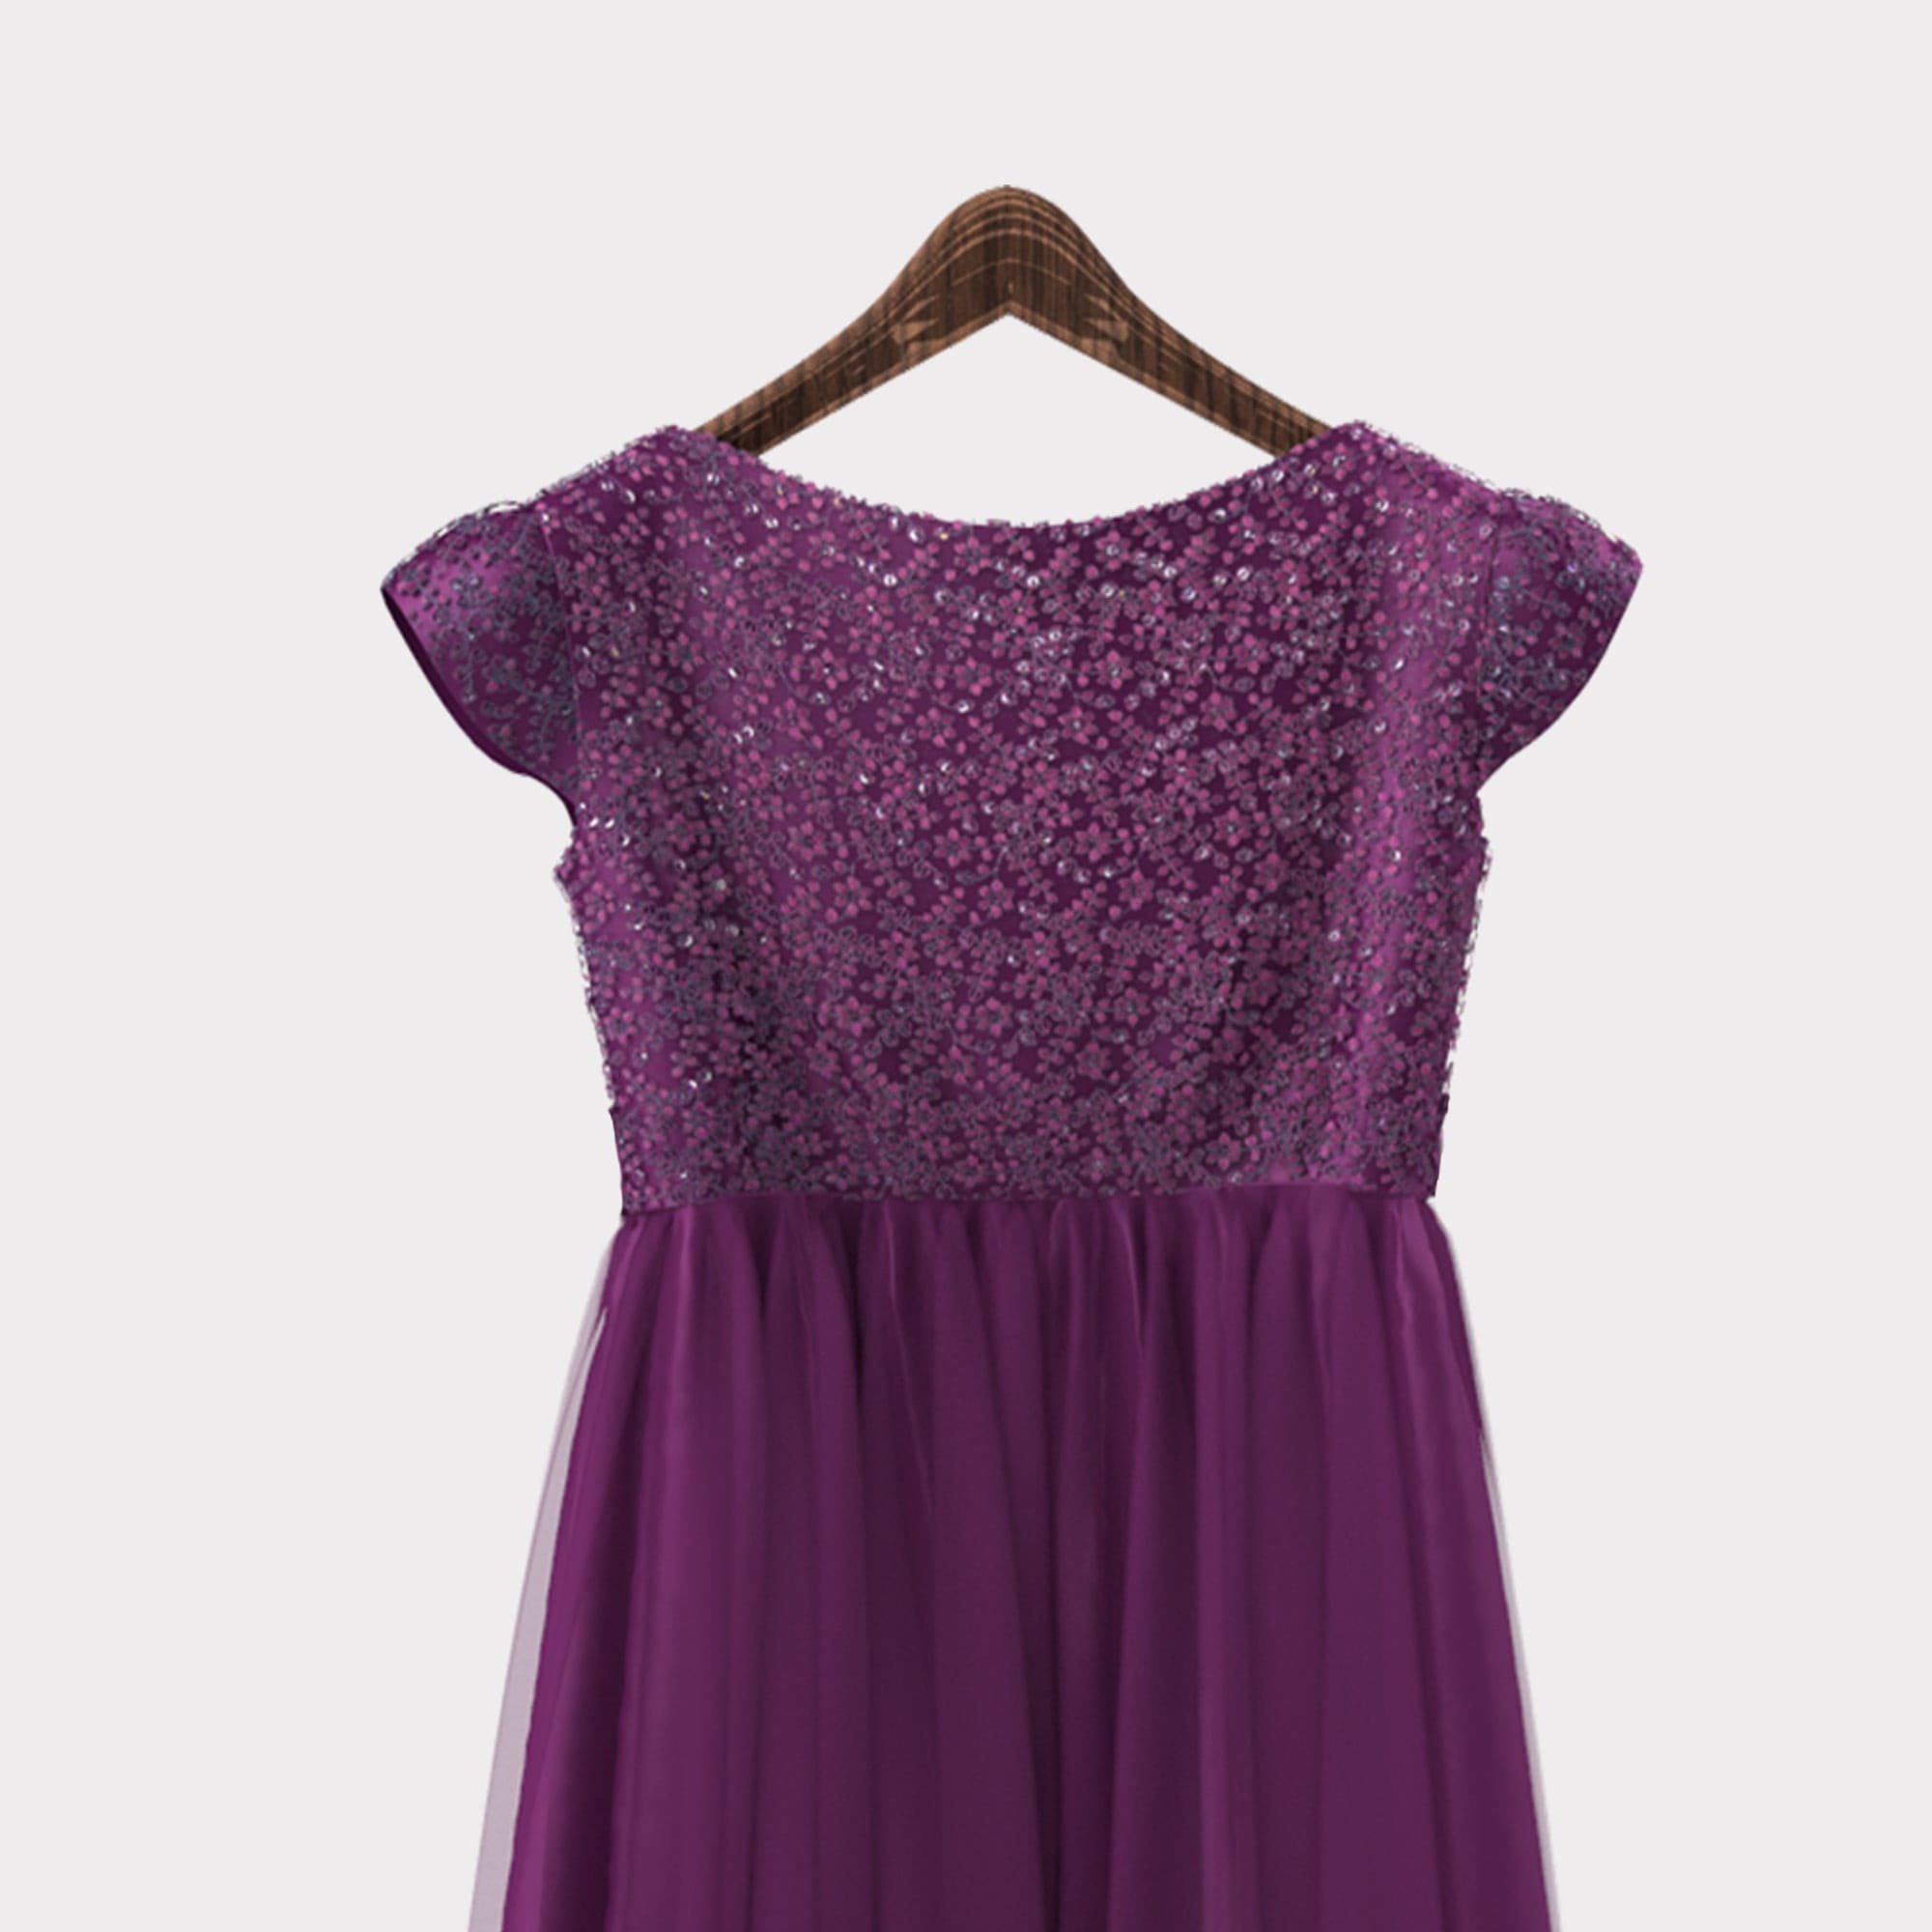 Gowns for Girls | Buy Girls Gowns Online in india - Myntra